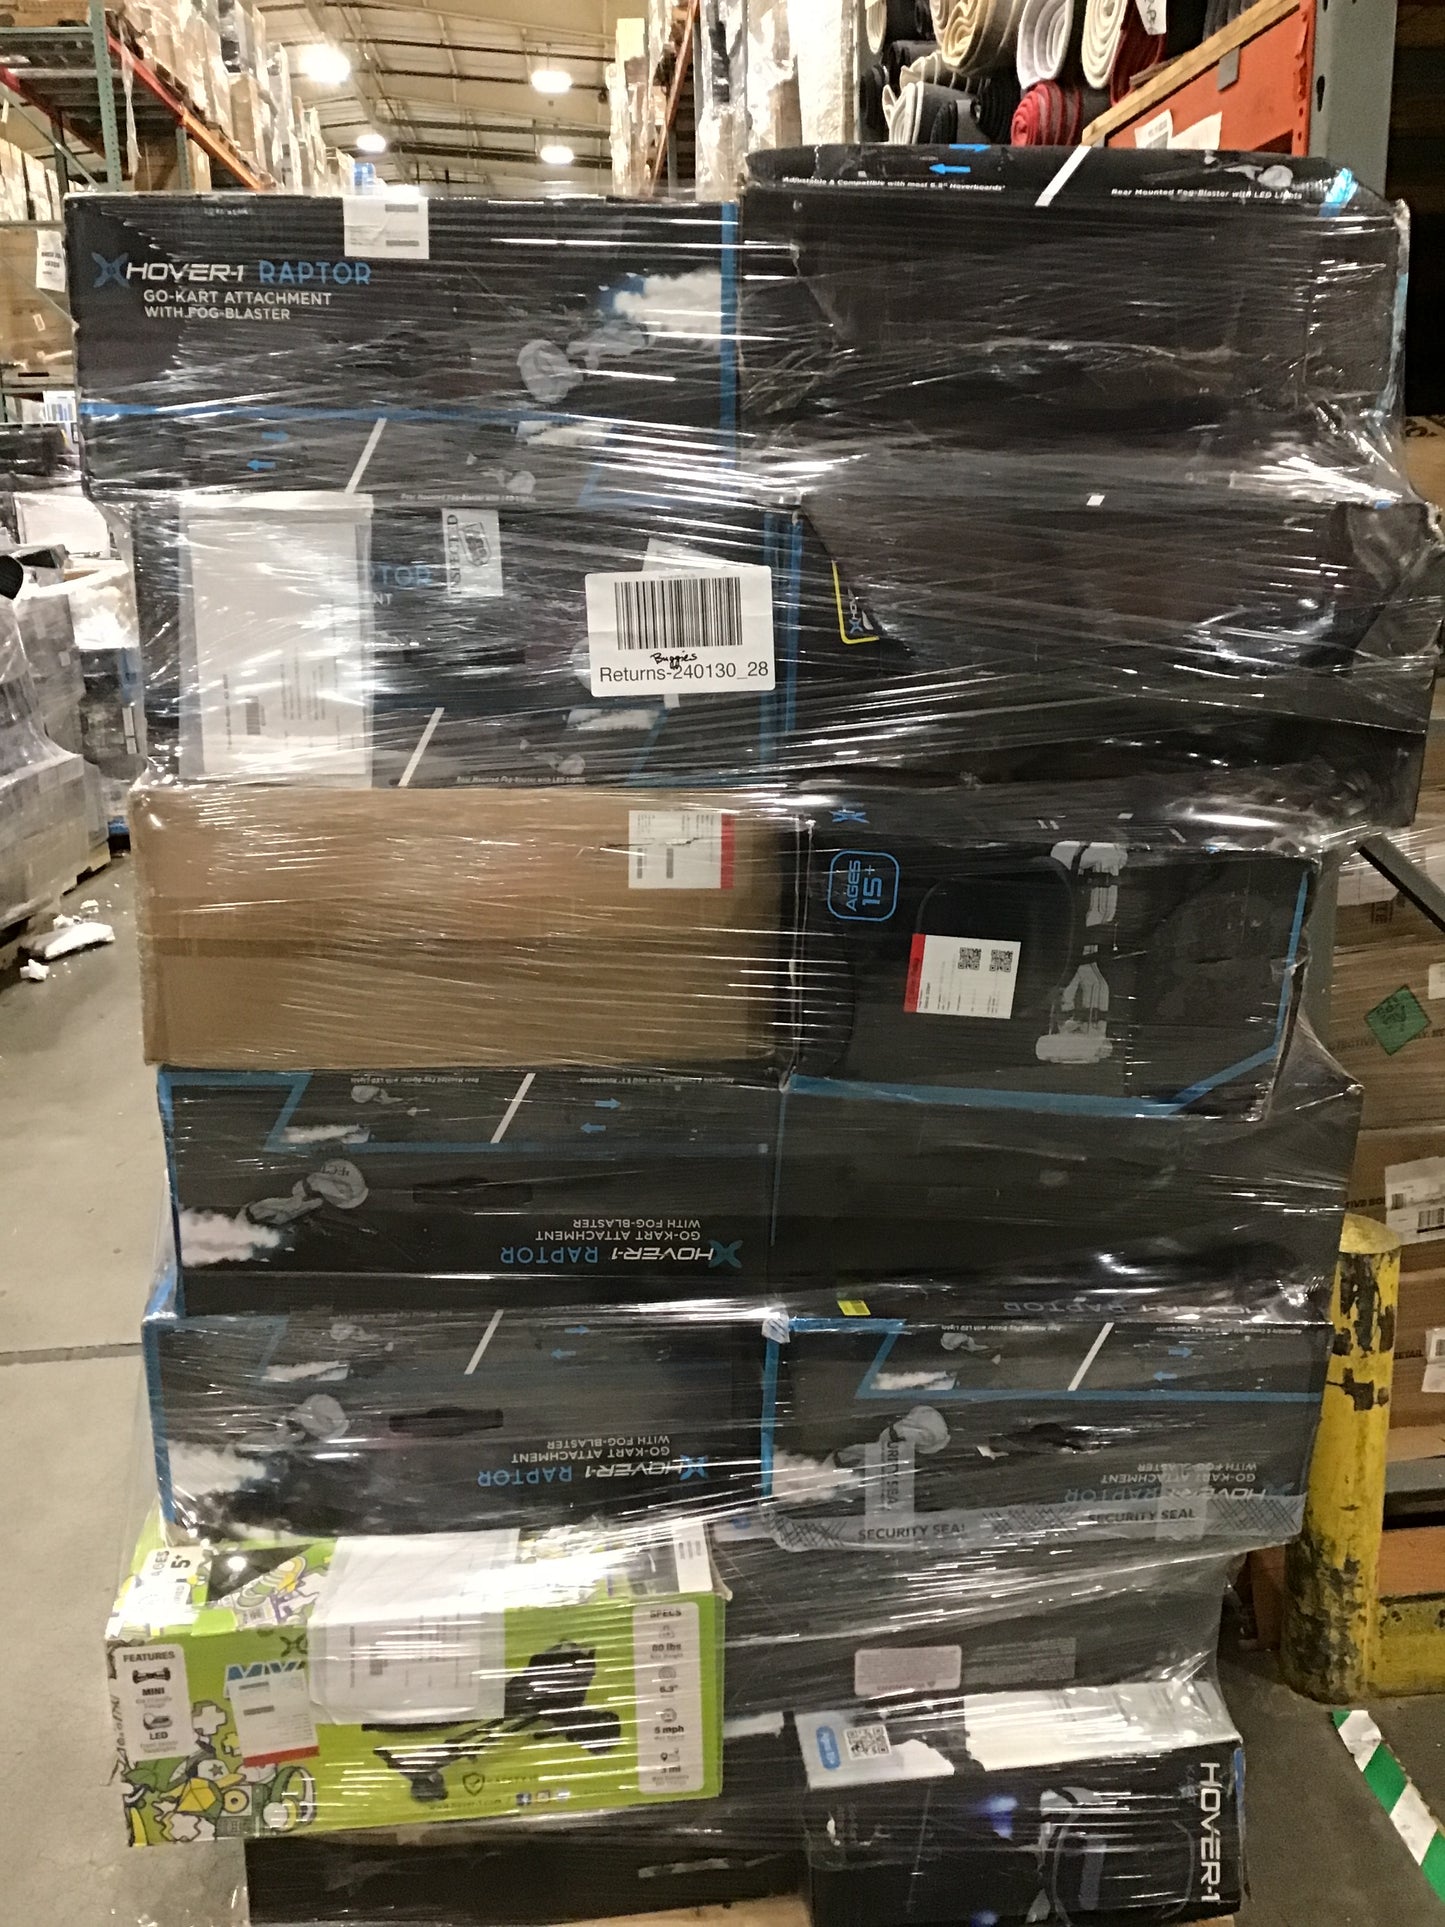 Liquidation Pallet of Accessories, Hoverboard Attachments and Hoverboards | Pallet-GAY | 240130_28